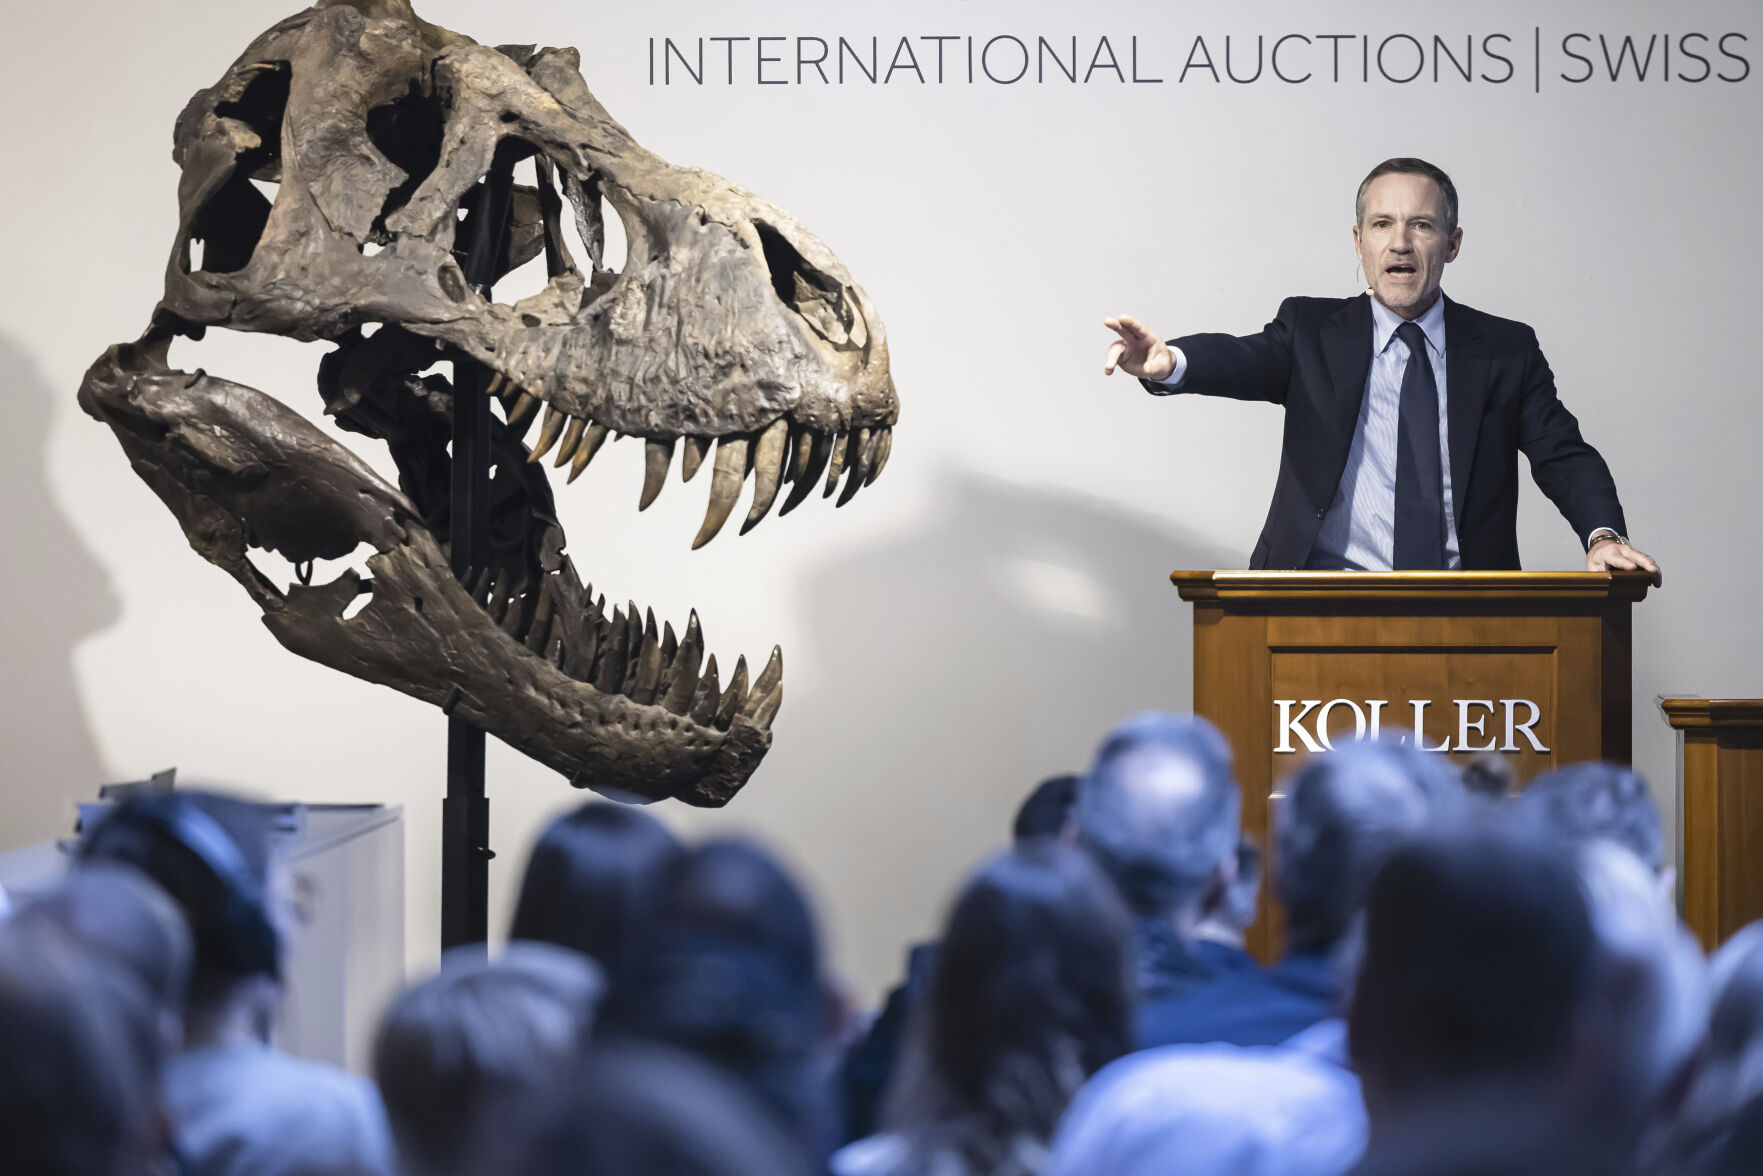 <p>Cyril Koller, CEO of auction house Koller, stands next to the head of the skeleton of a Tyrannosaurus rex named Trinity, during an auction in Zurich, Switzerland on Tuesday, April 18, 2023. The 293 T. rex bones were assembled into a growling posture that measures 11.6 meters long (38 feet long) and 3.9 meters high (12.8 feet high. The skeleton is expected to fetch 5 million to 8 million Swiss francs ($5.6-$8.9 million). (Michael Buholzer/Keystone via AP)</p>   PHOTO CREDIT: Michael Buholzer - foreign subscriber, Keystone